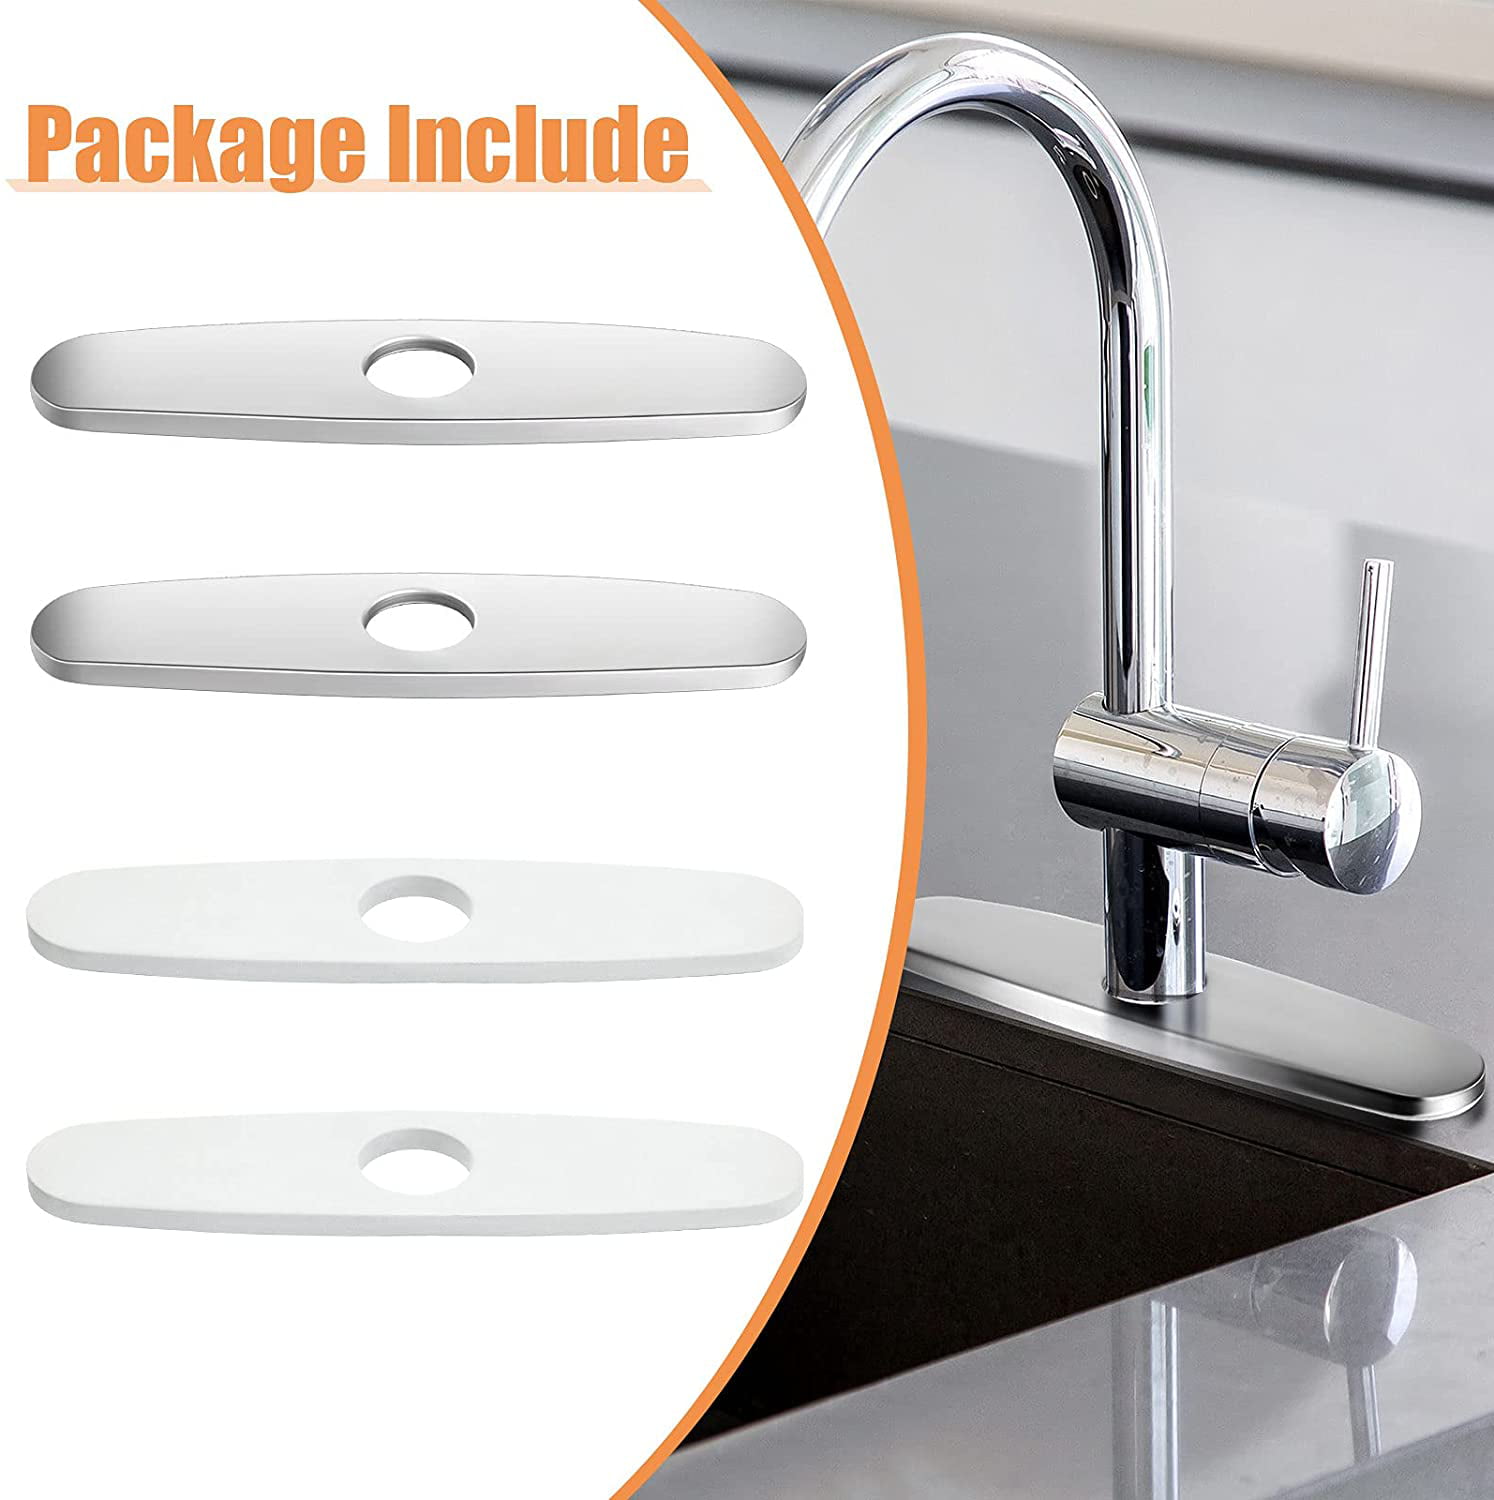 Yardwe Faucet Plate Kitchen Sink Faucet Hole Cover Stainless Steel Escutcheon Brushed Nickel Sink Deck Plate for Kitchen Bathroom Silver